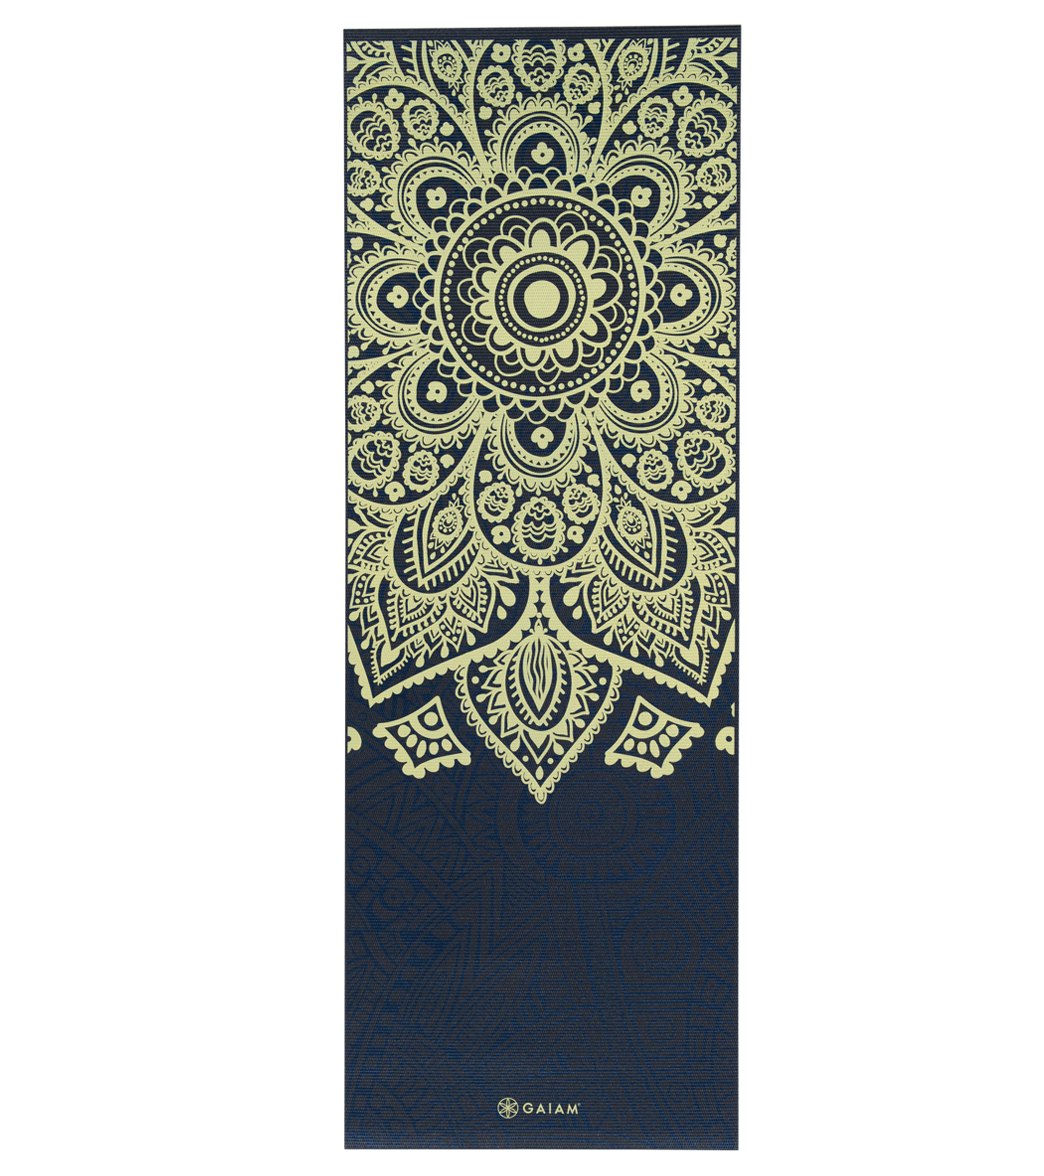 Gaiam Sundial Layers Printed Yoga Mat 68 6mm Extra Thick at